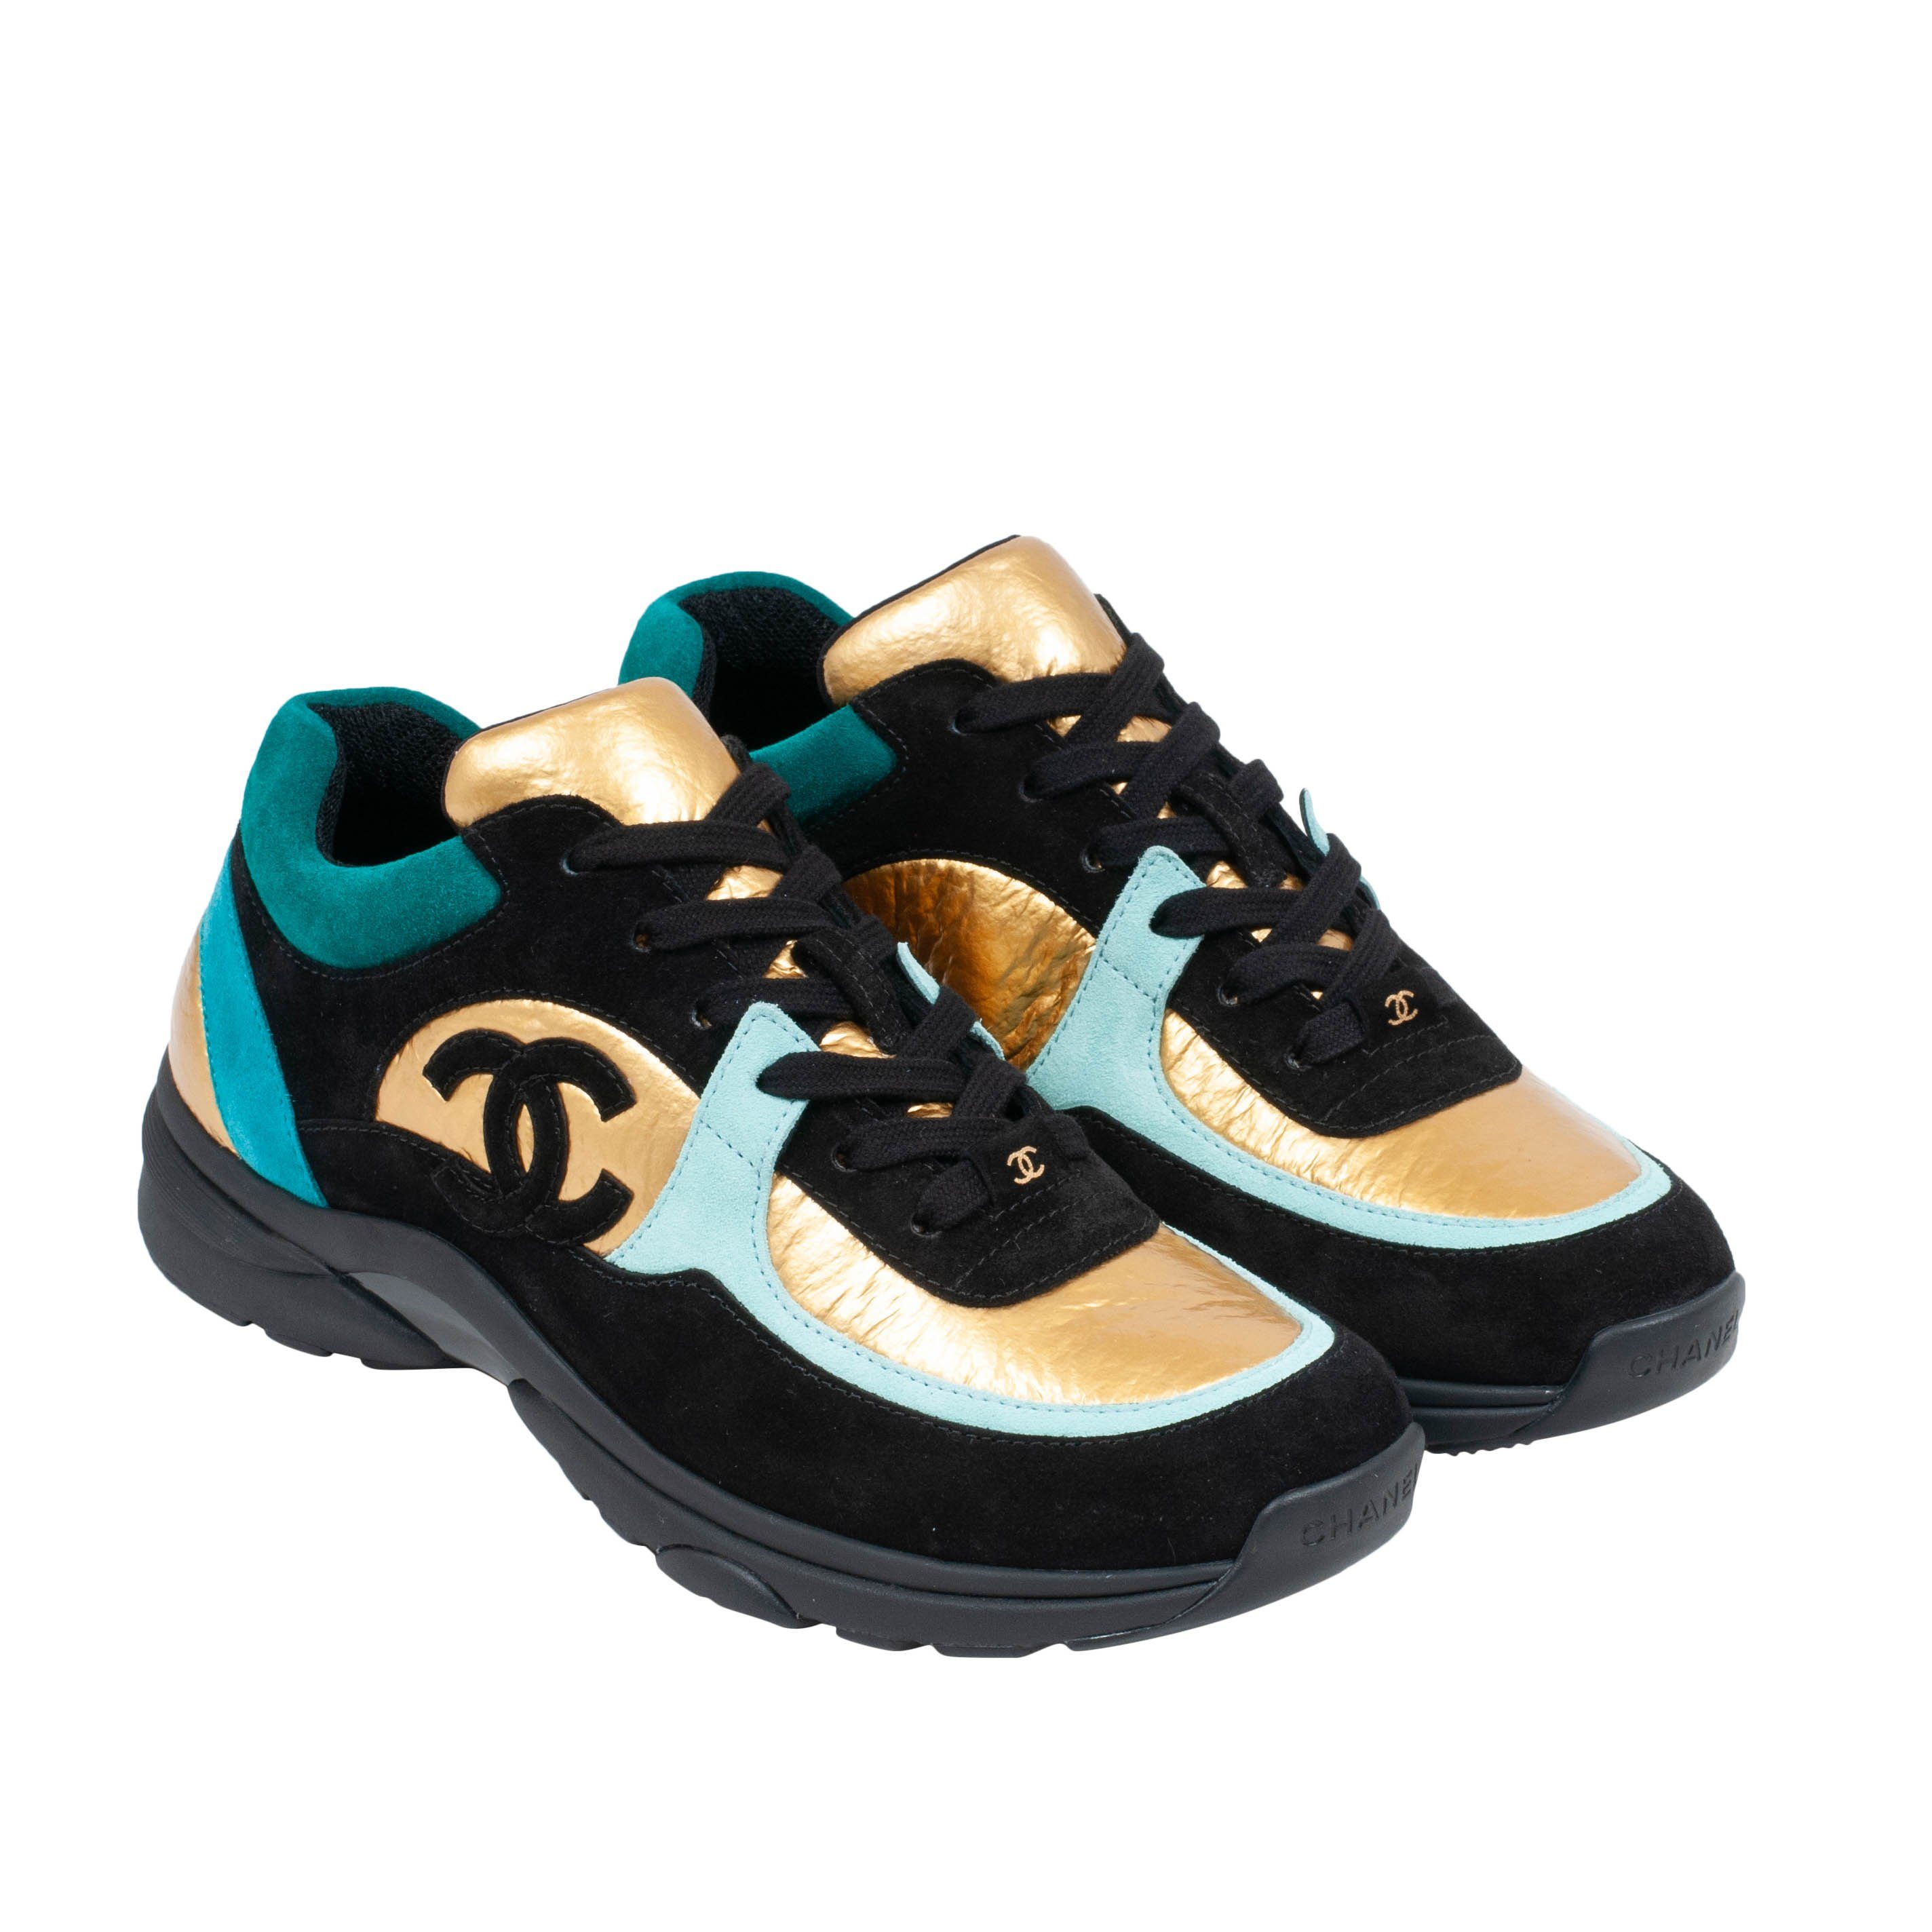 $900 19A CHANEL BLACK GOLD TURQUOISE LEATHER SNEAKERS 39.5